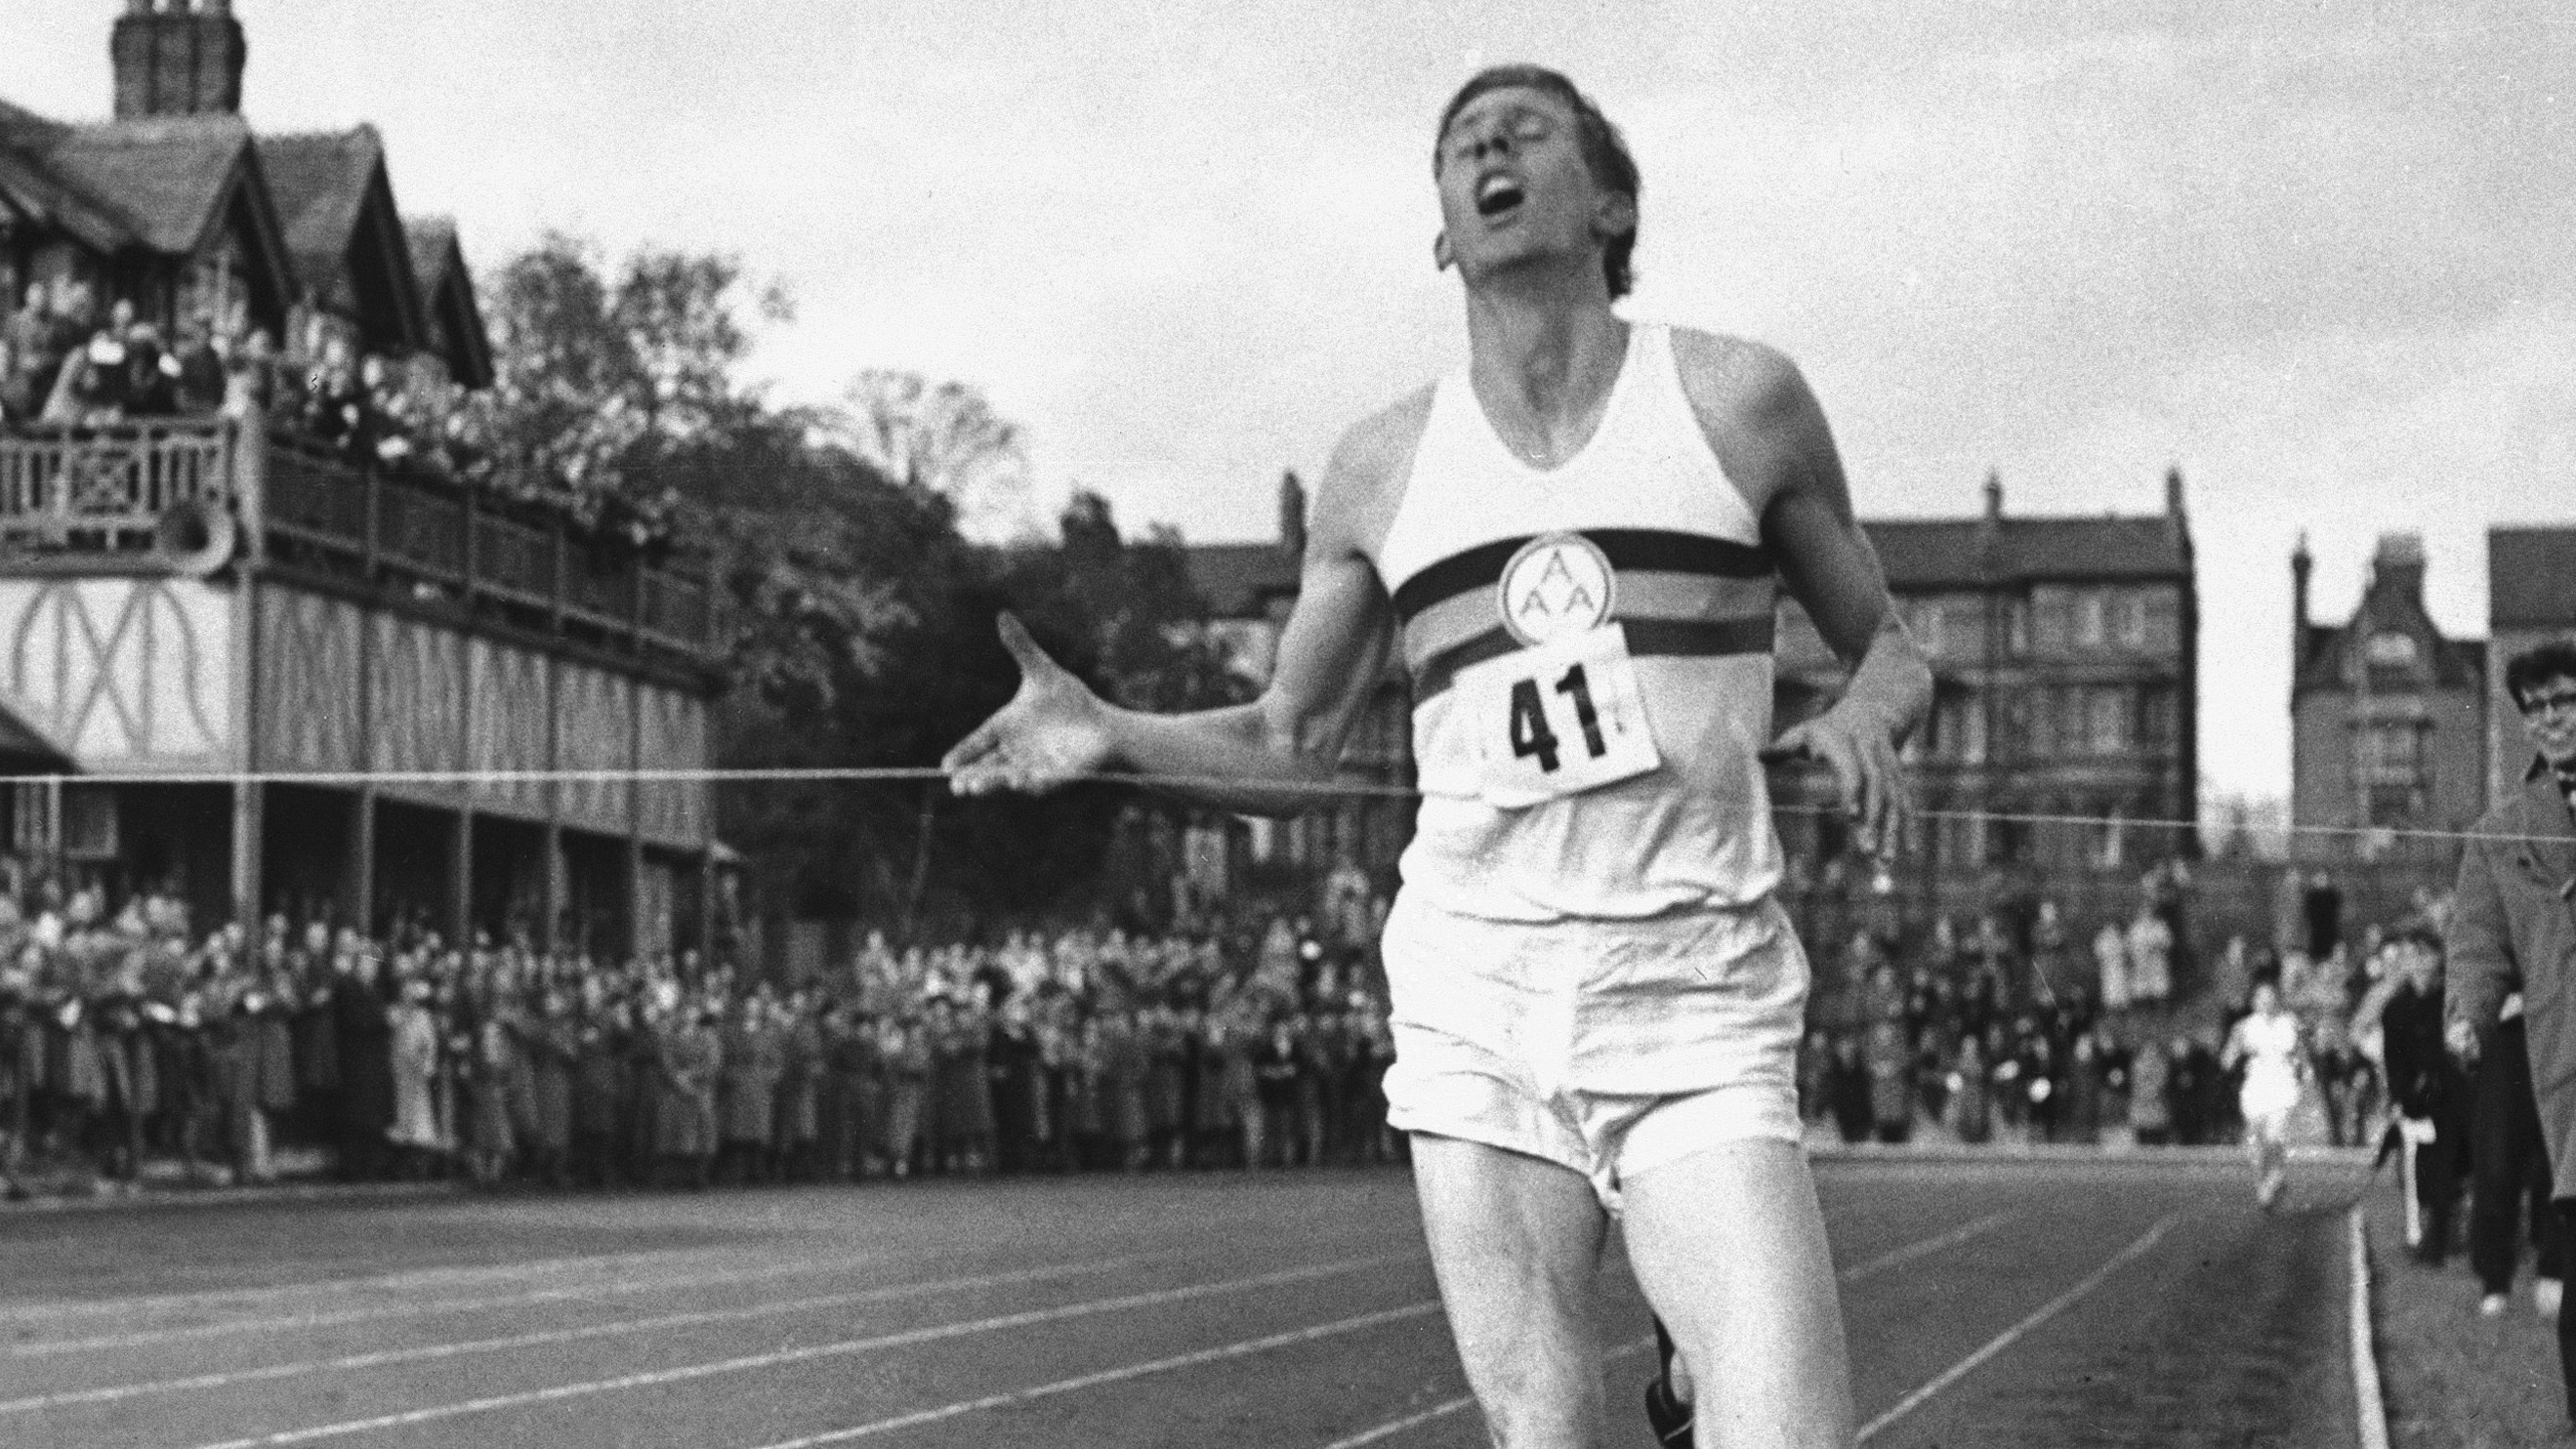 Bannister crosses the finish line in 3min 59.4sec in Oxford on May 6, 1954 to break the four-minute mile barrier